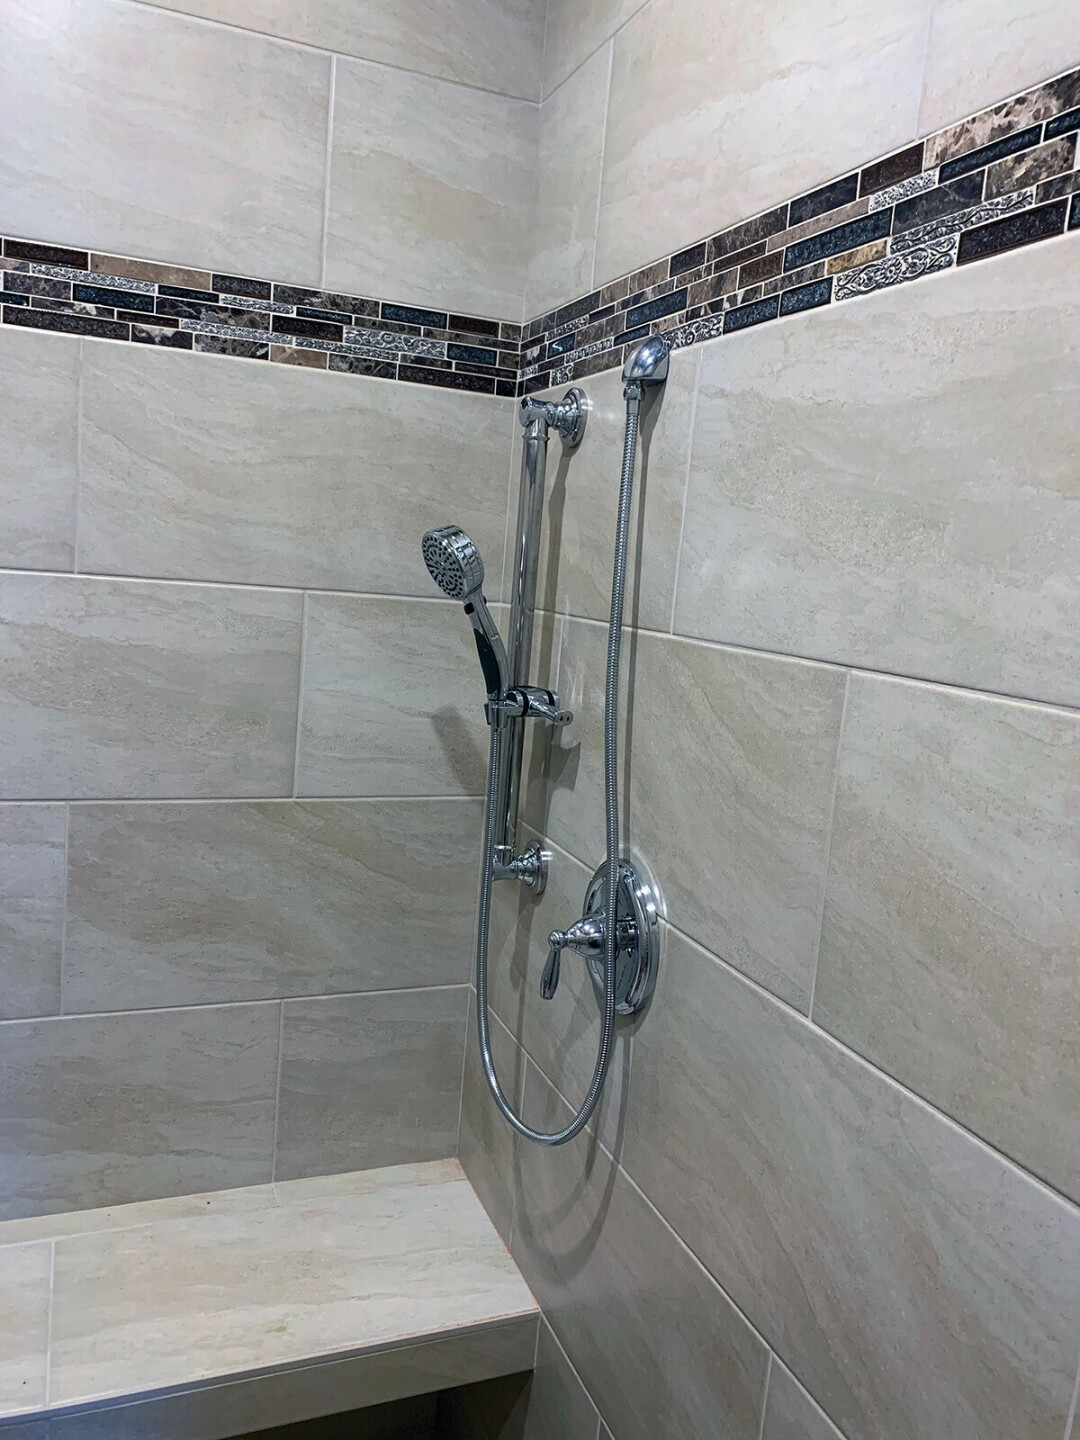 RIGHT: This shower was designed around the needs of the user, including a bench placed at the proper height, open space under the bench for the user’s legs, a shower wand handle that is also grab bar, and more.